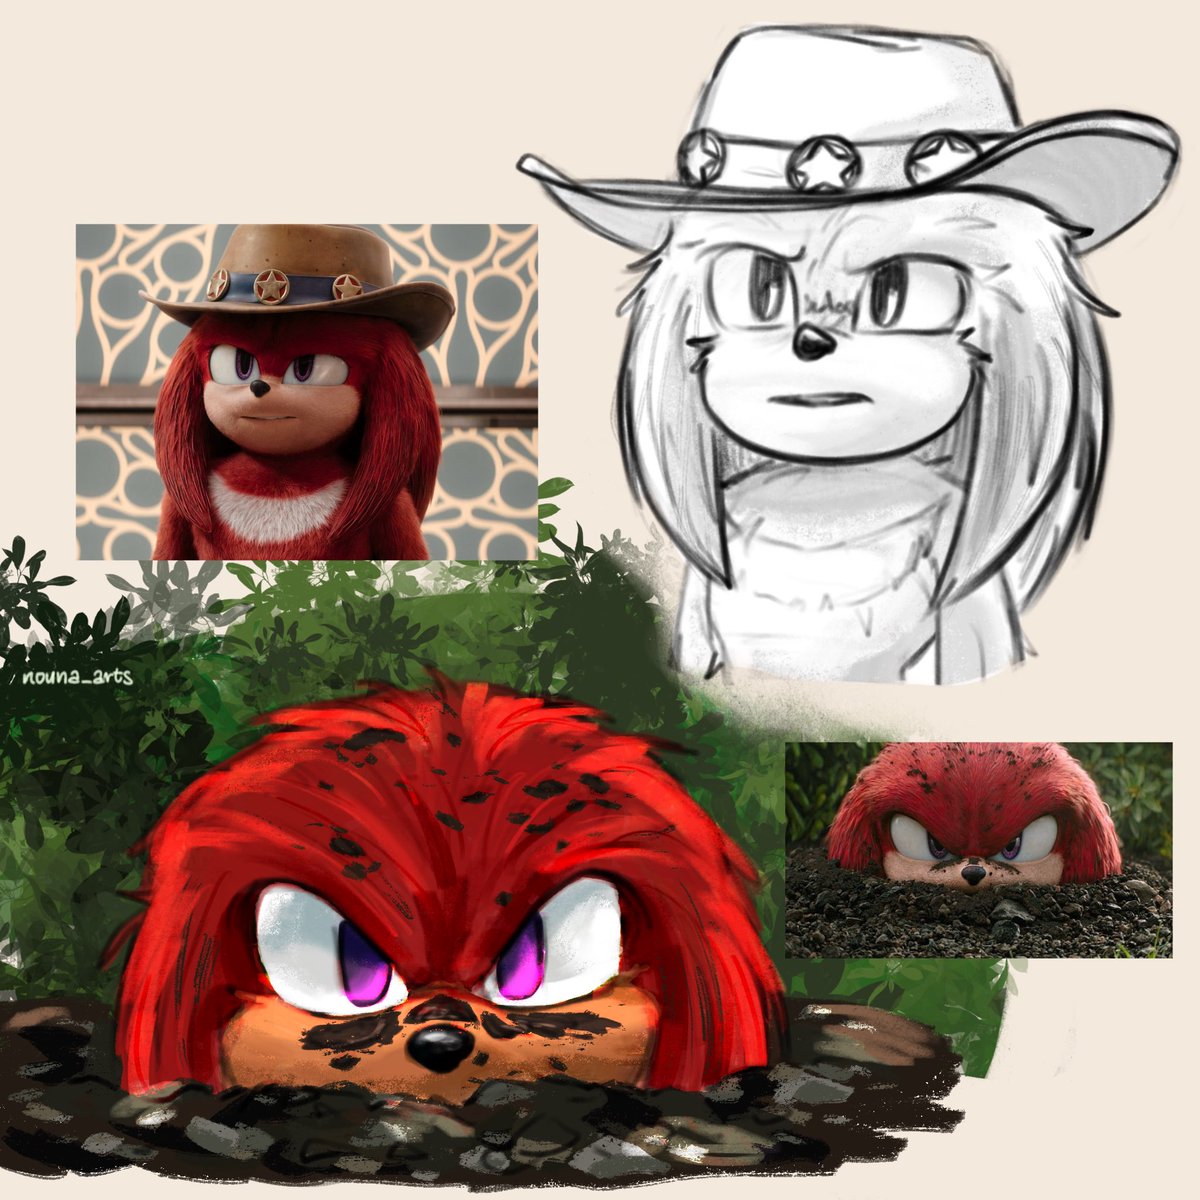 Day 4 of drawing Knuckles everyday until the series comes out Redraws from the images they released FOR the series! IM SO EXCITED RAAHHH #Knucklesseries